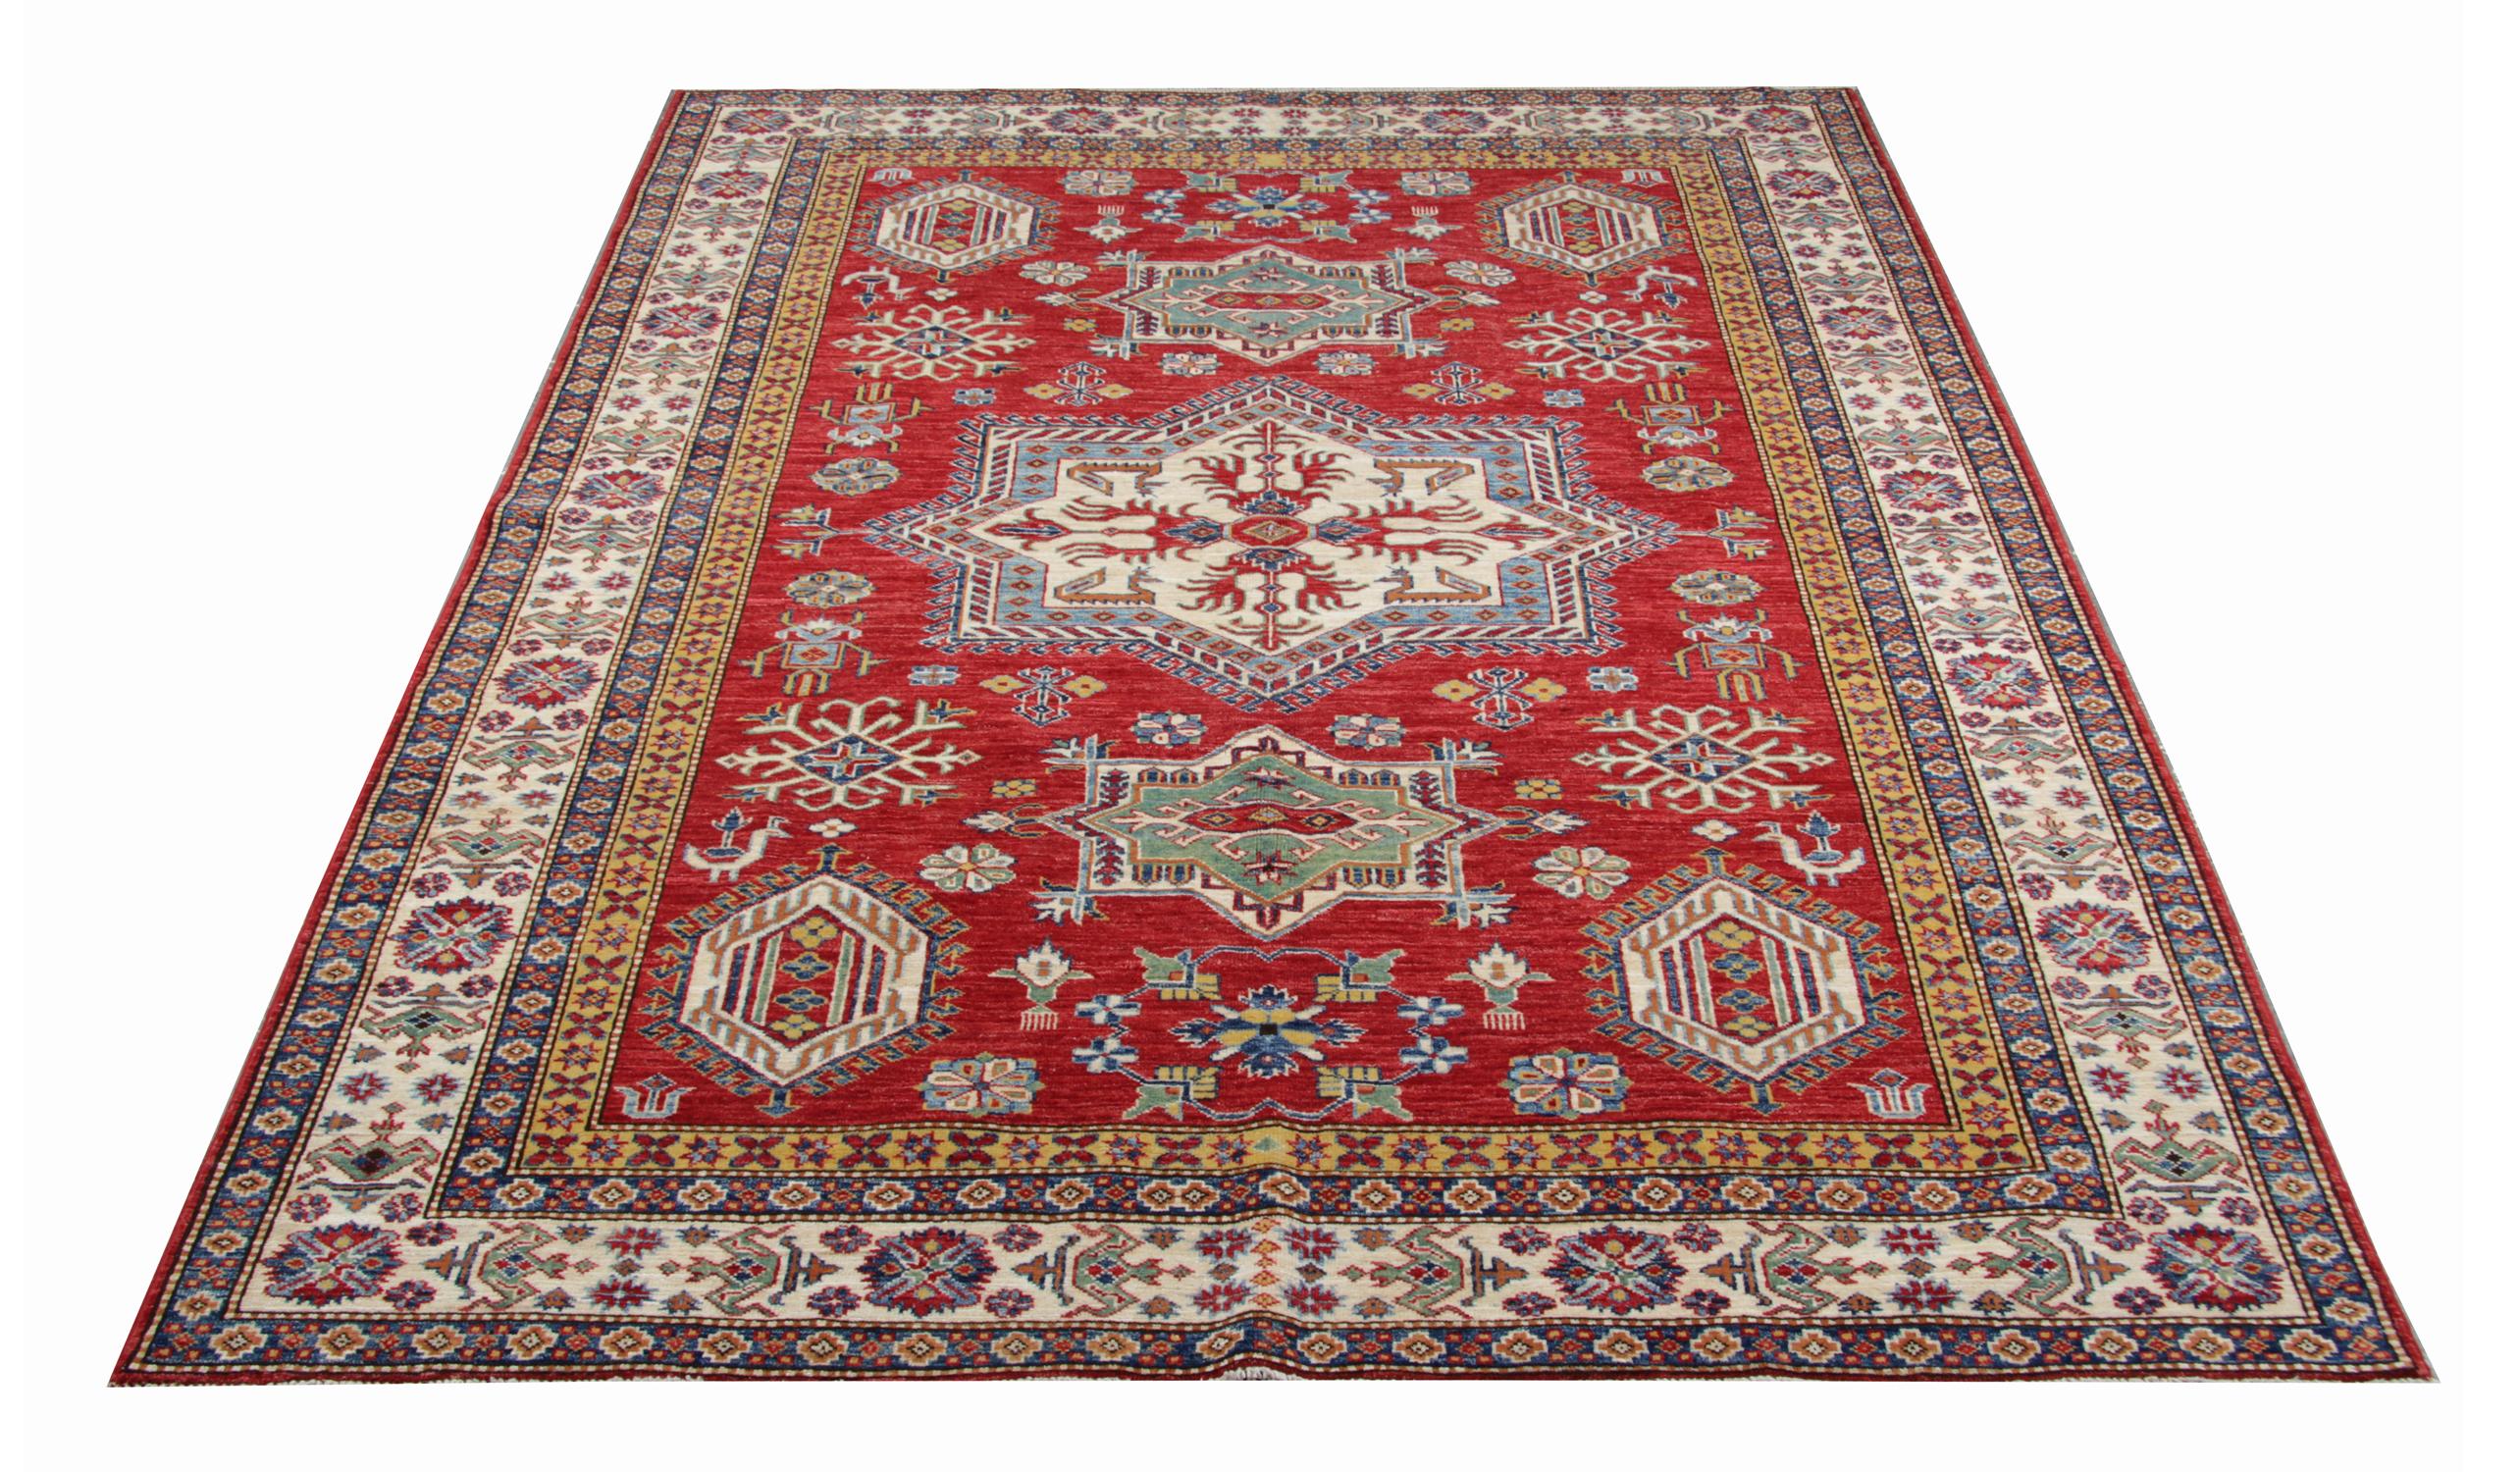 This Kazak red rug has a traditional border with a large medallion. The central area of this tribal rug symbolises a garden of paradise protected by the 'walls' of geometric rug patterns. Traditional rugs would complement your home as floor rugs.